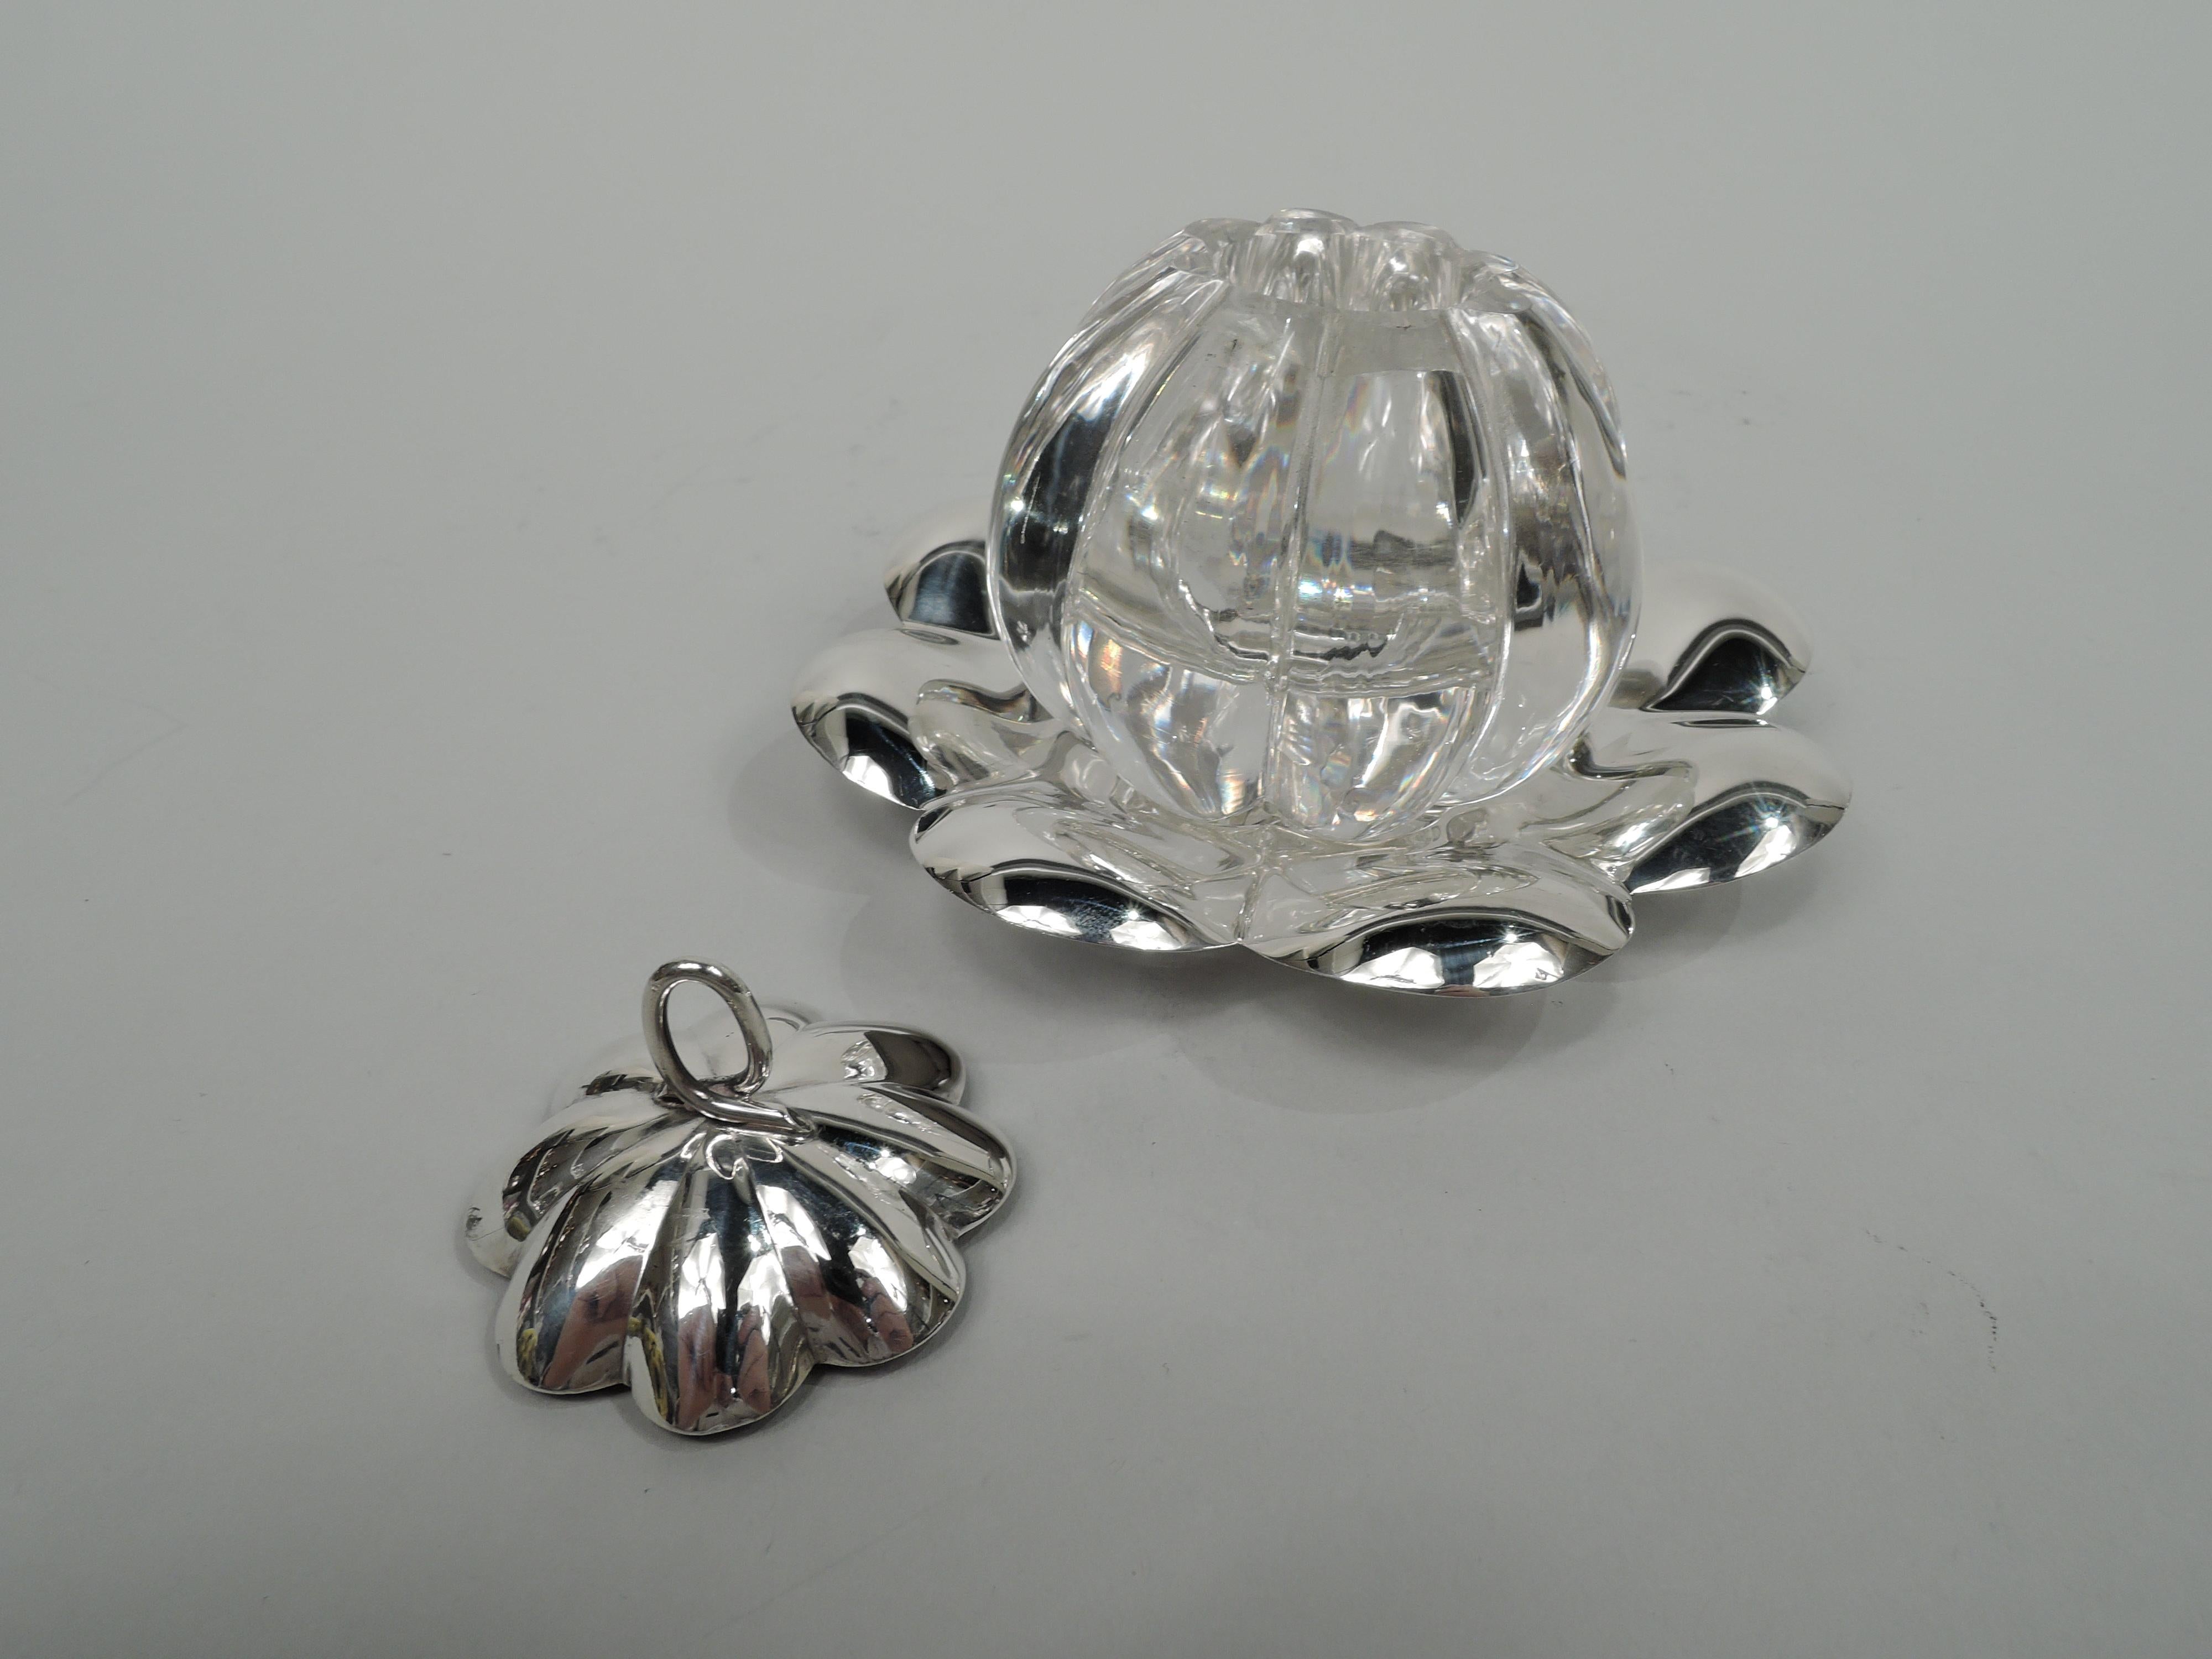 Modern sterling silver and glass inkwell on stand, circa 1920. Lobed melon-form glass bowl; sterling silver cover domed with overlapping ovoid ring finial. stand has well and large lobing. stand and cover marked “Sterling”. Total weight (silver